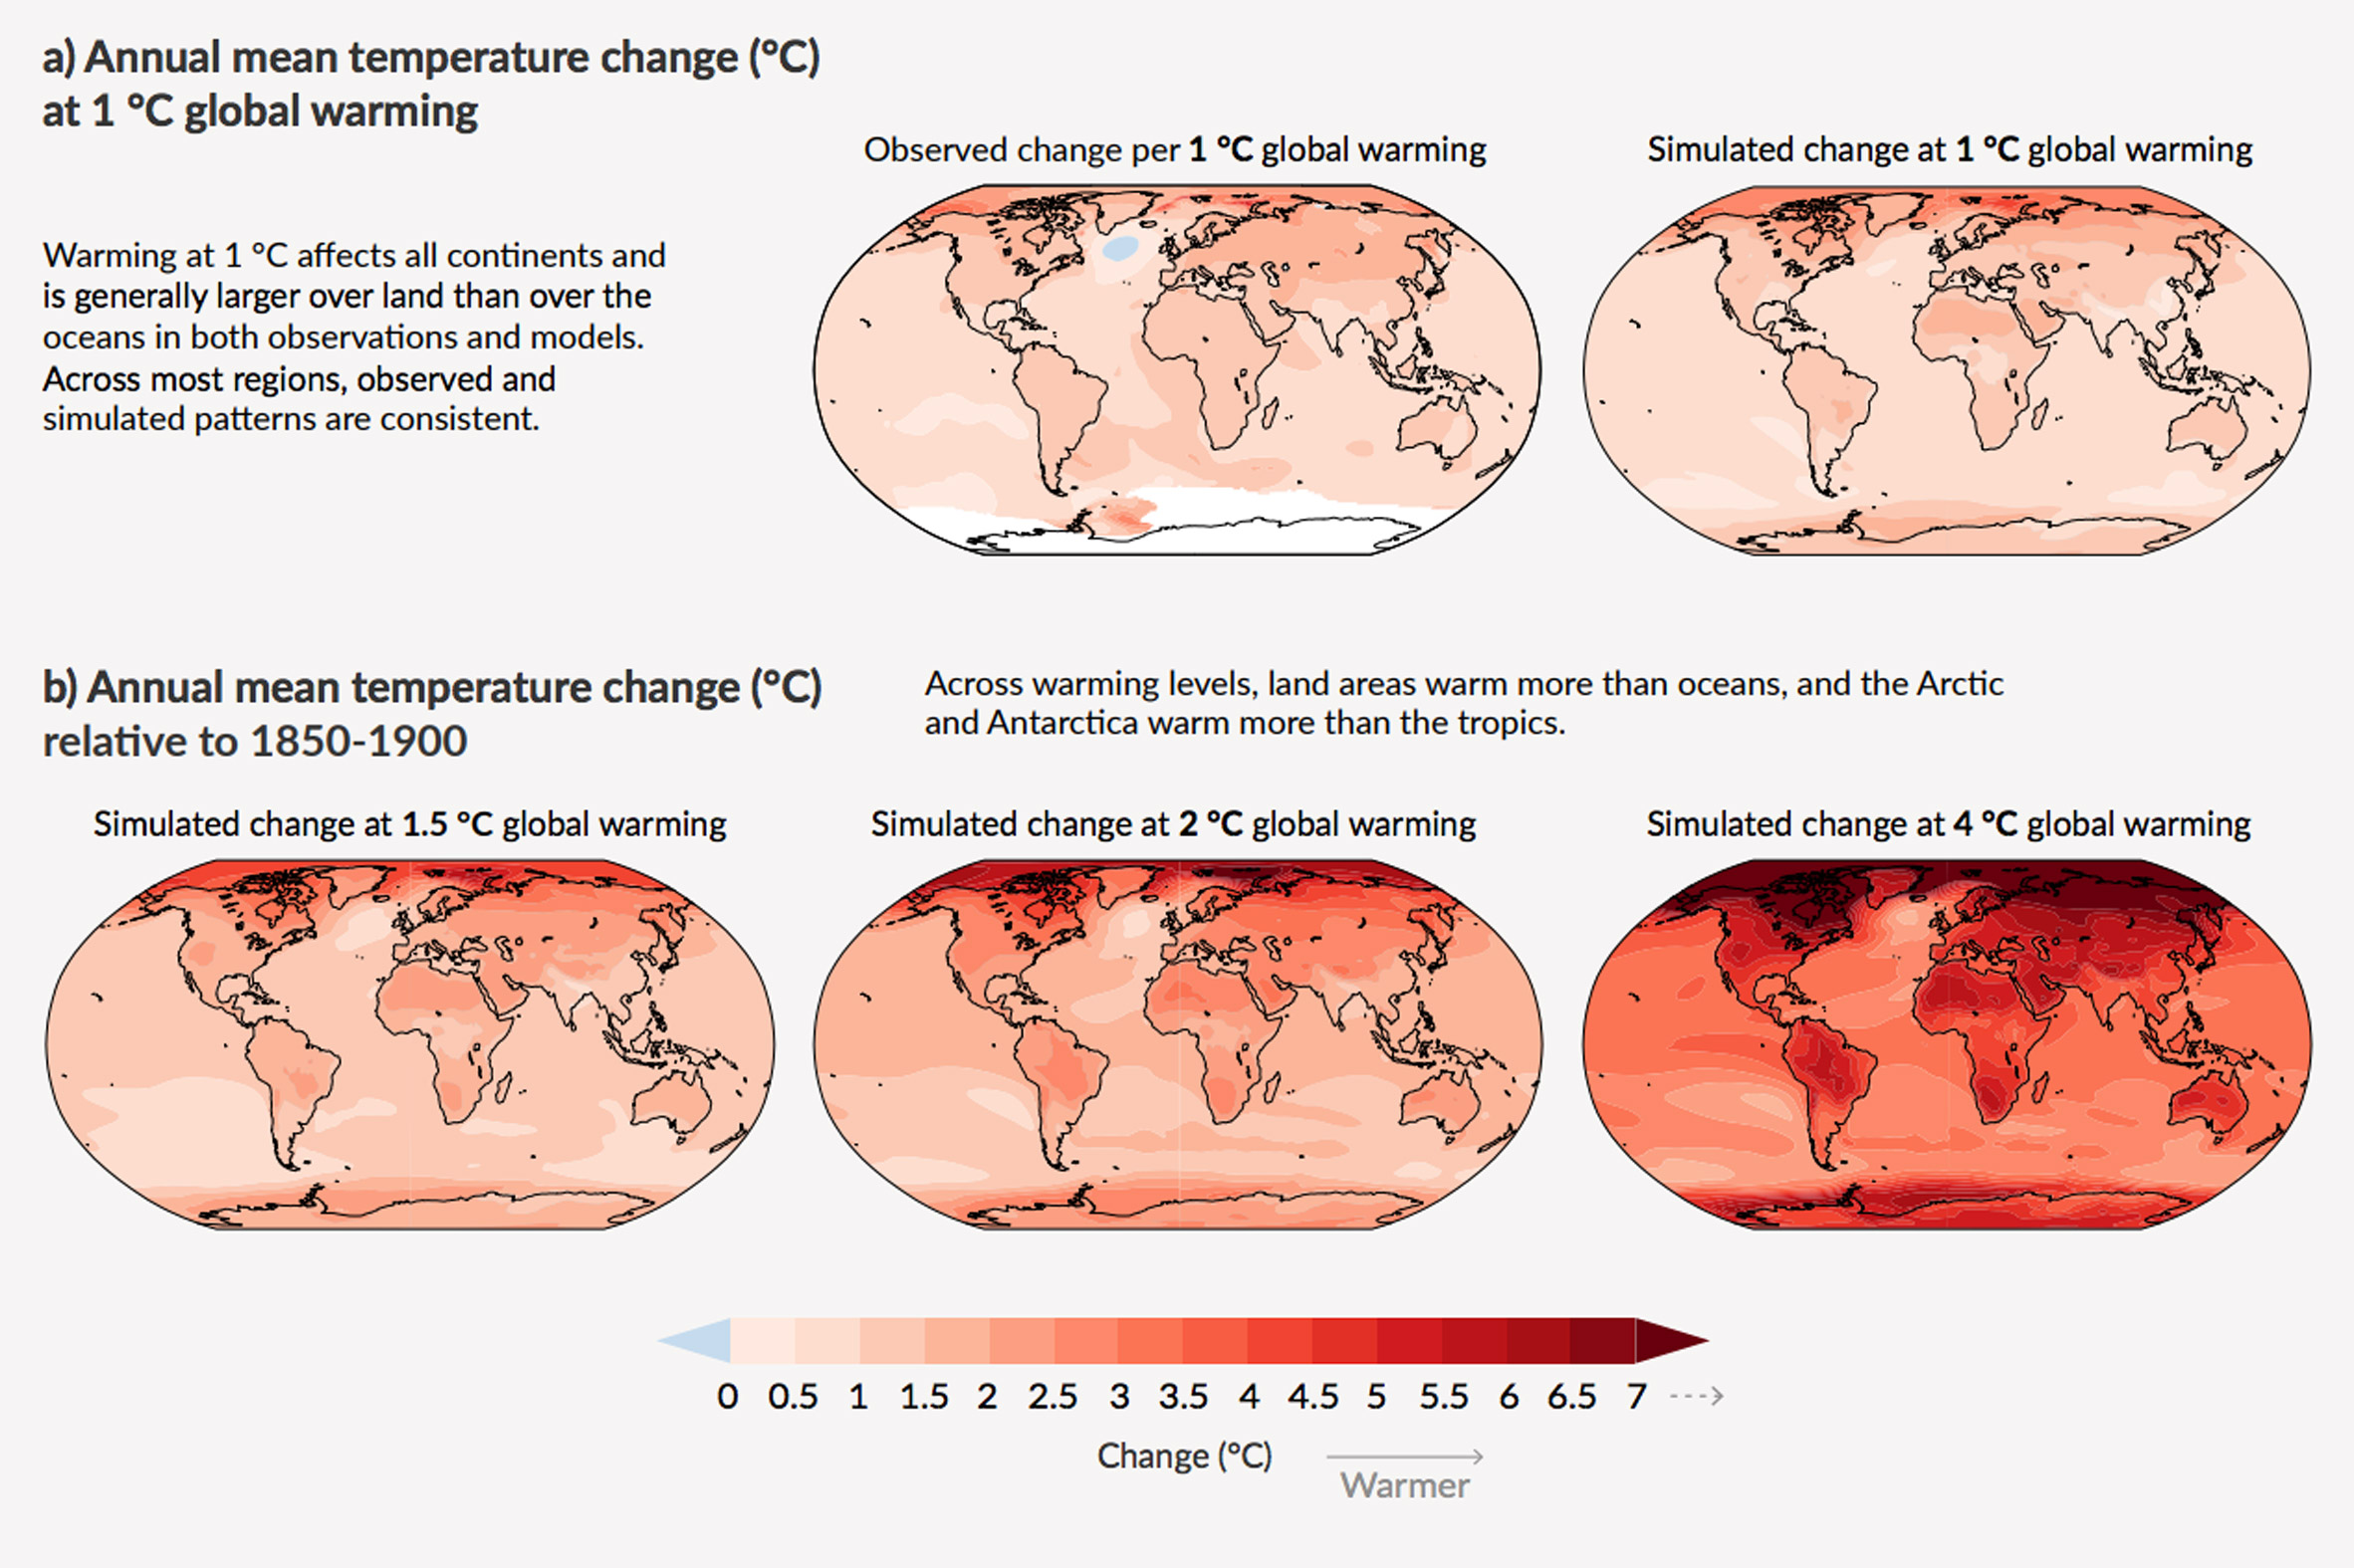 Annual mean temperature changes based on 1, 1.5, 2 and 4 degrees of warming from IPCC climate report